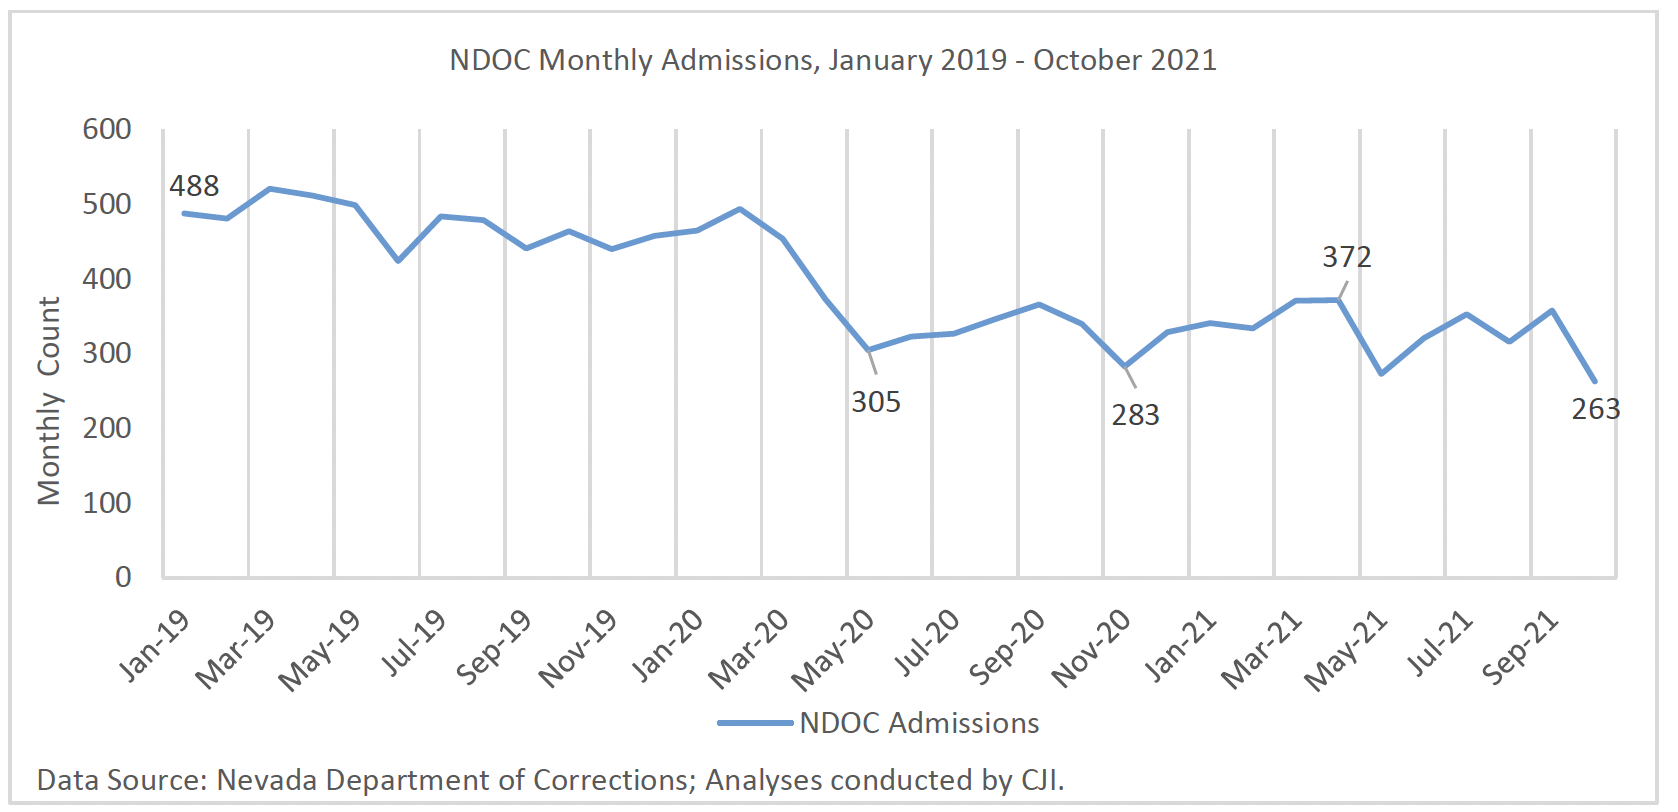 A view of dramatically lower monthly NDOC admissions in Spring 2020 fluctuated but remained low through 2021 